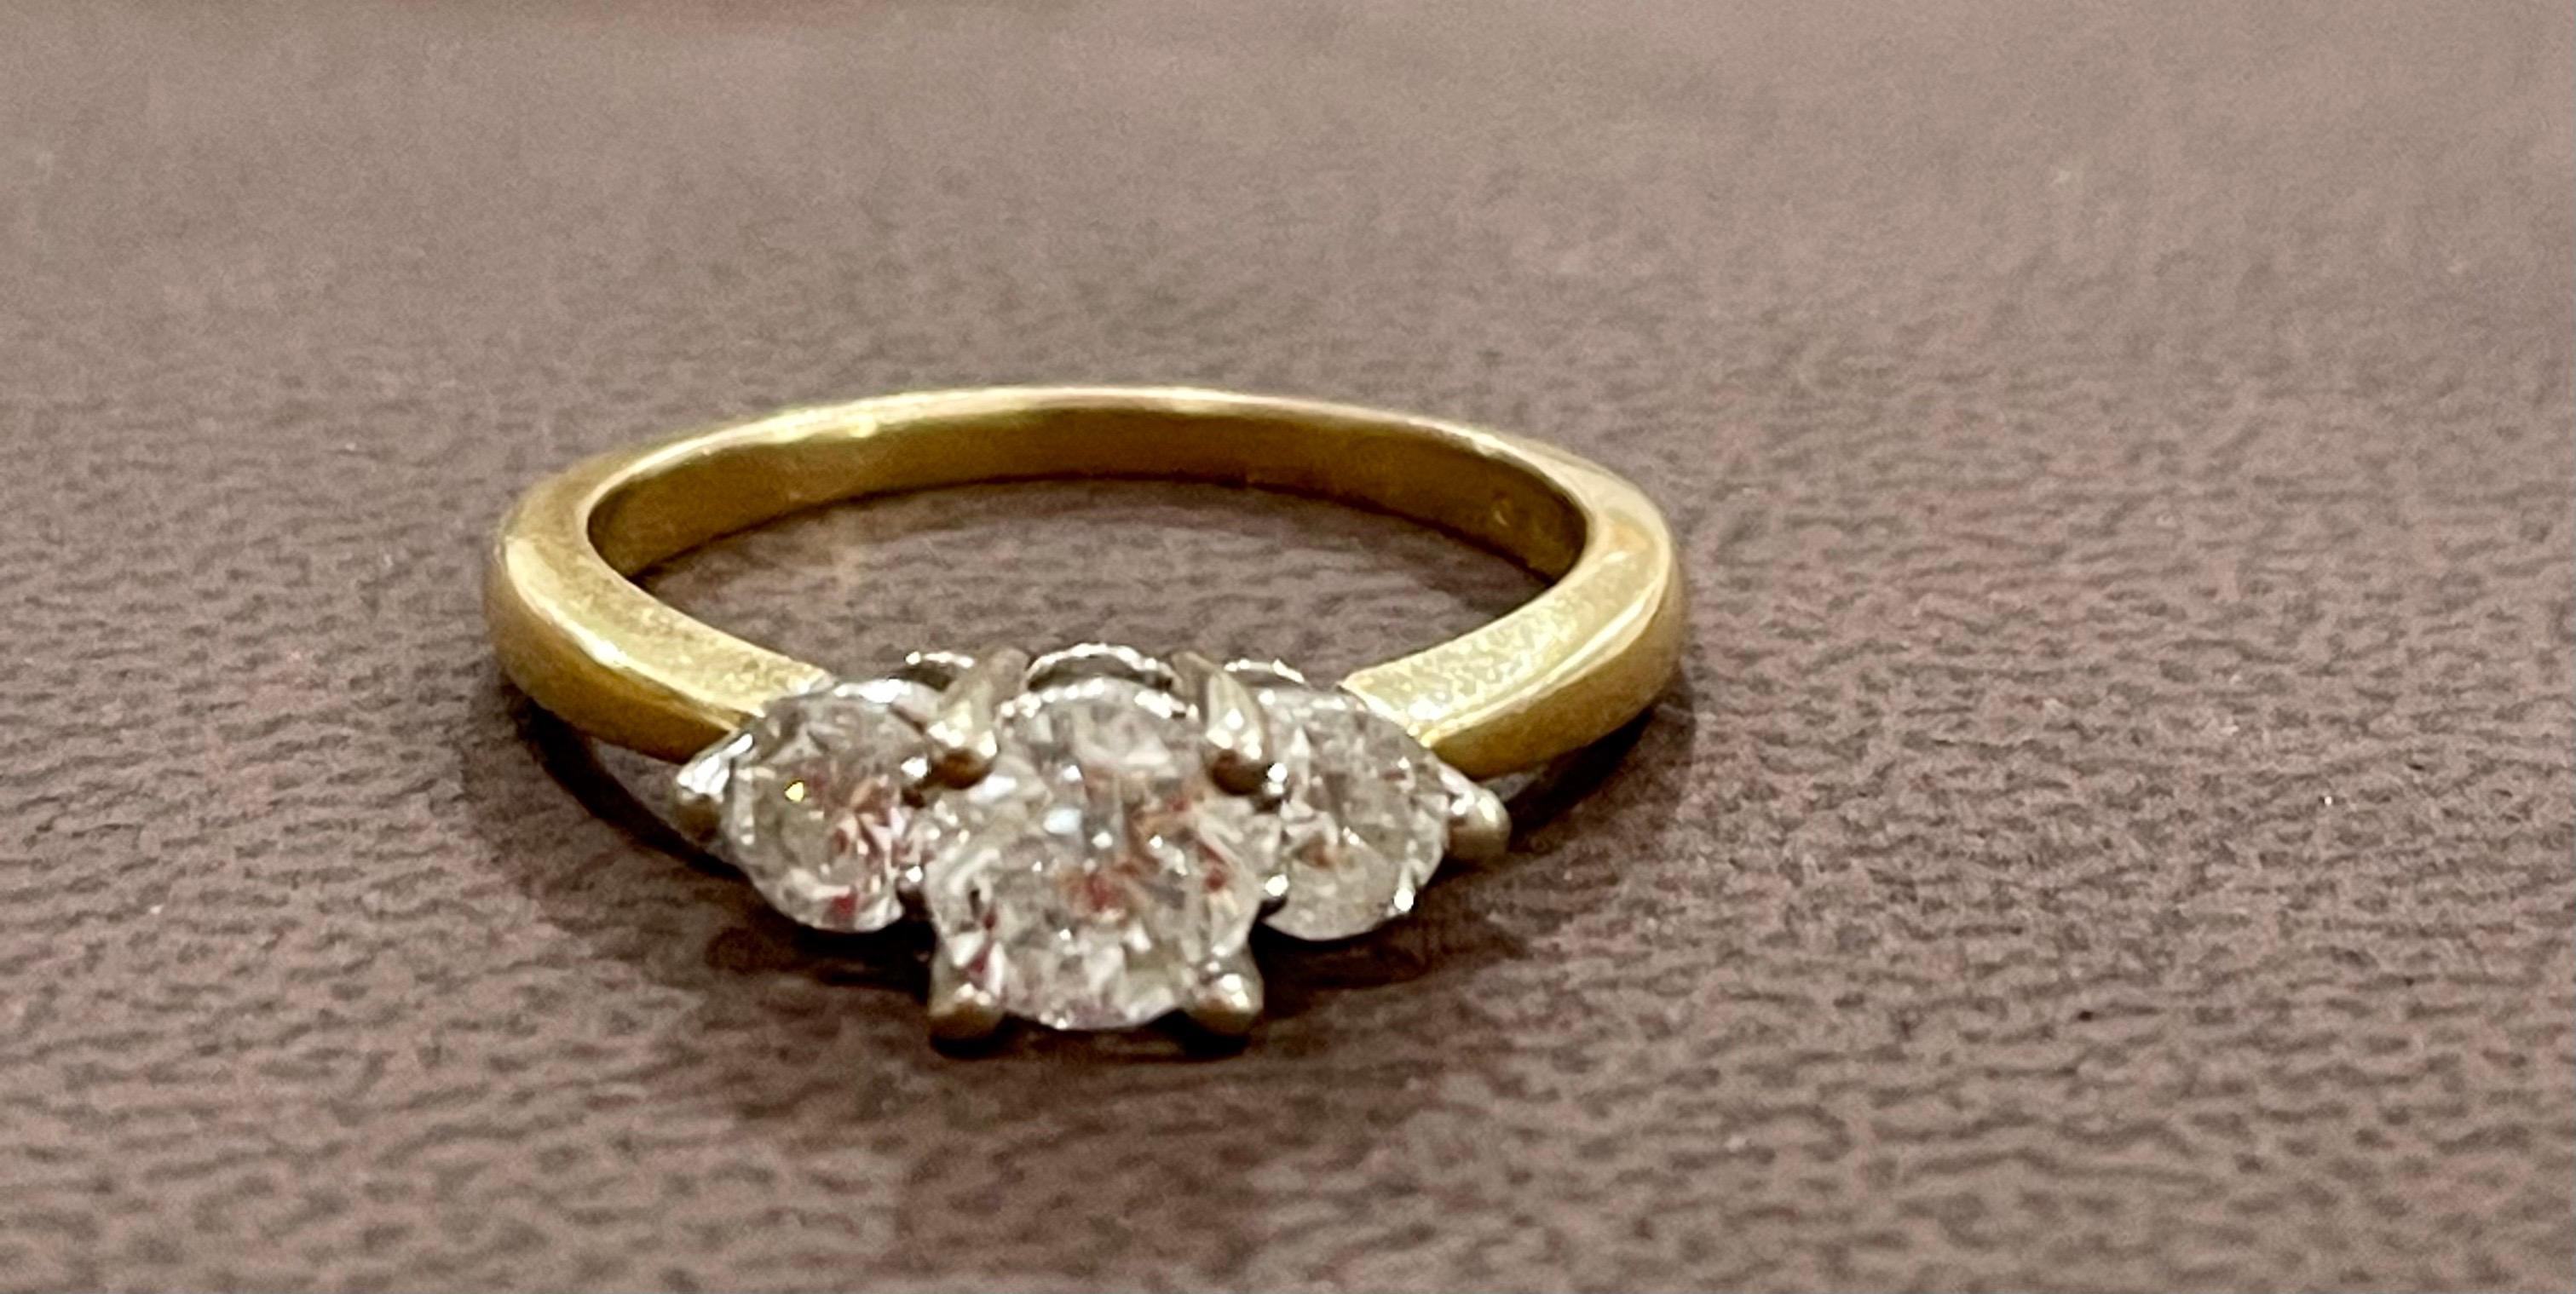 Three-Stone Diamond 1.0 Carat Traditional Ring/Band 14 Karat Yellow Gold

Three Brilliant cut round diamonds  next to each other .
Center stone is approximately 60 pointer while the side diamonds are  approximately 20 points
This is a Engagement